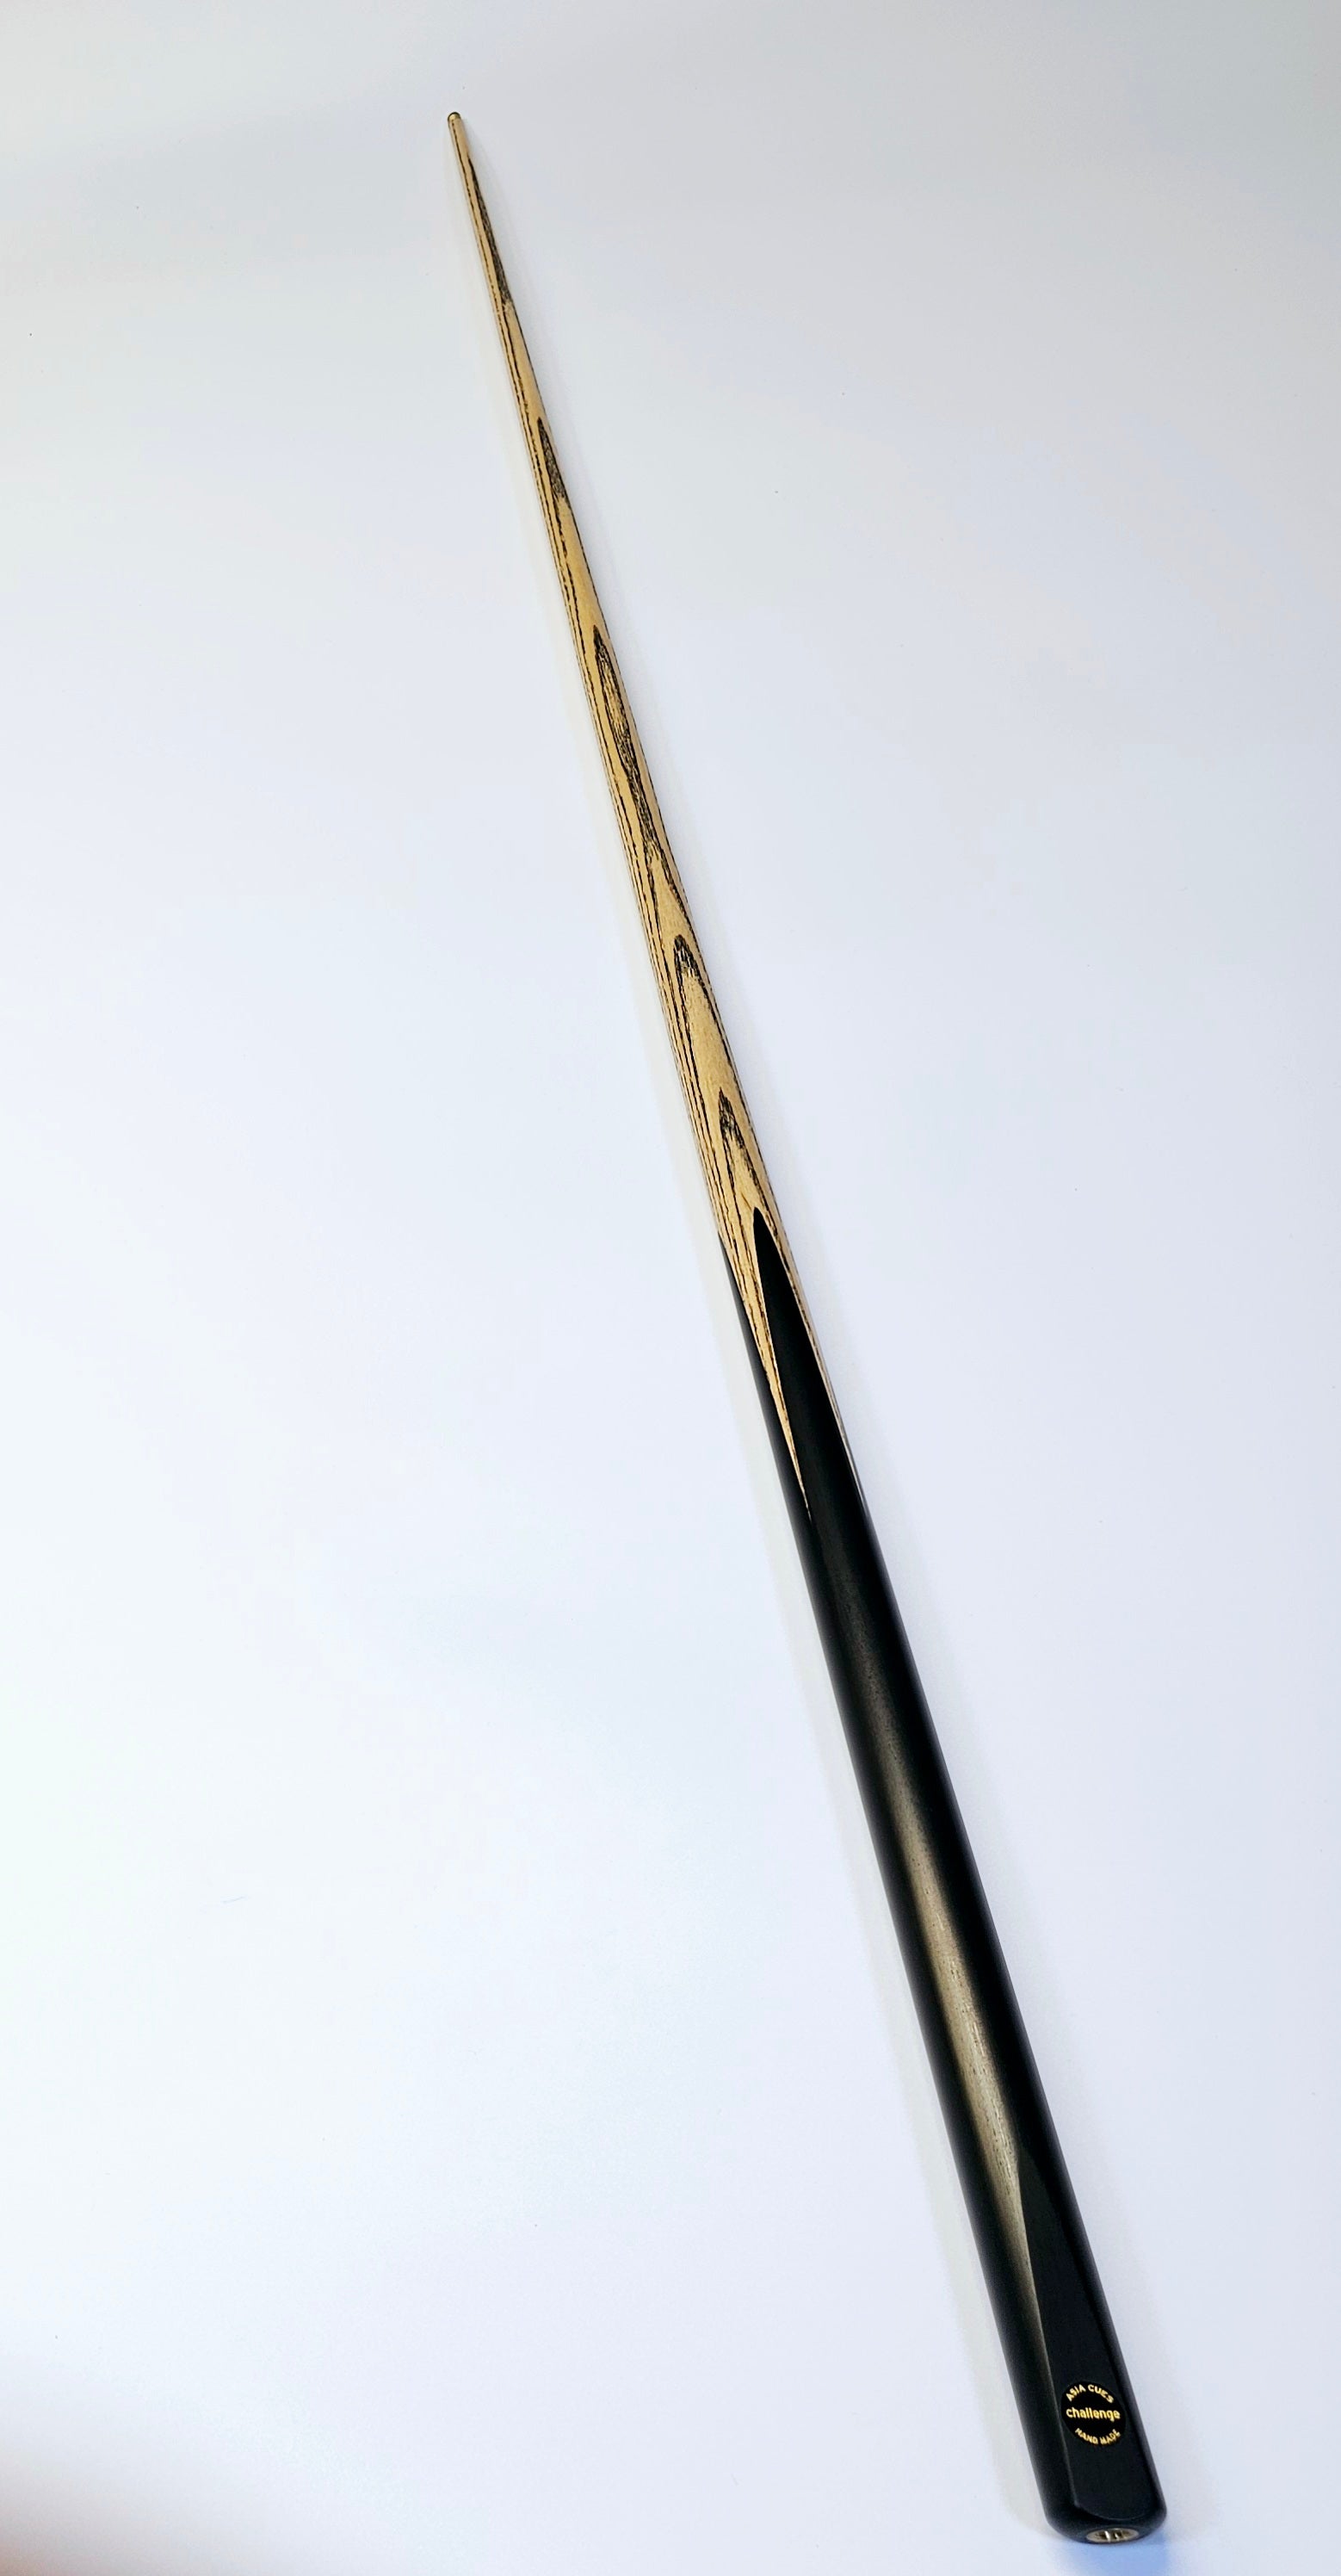 Asia Cues Challenge - One Piece Snooker Cue 9.8mm Tip, 18.2oz, 59"